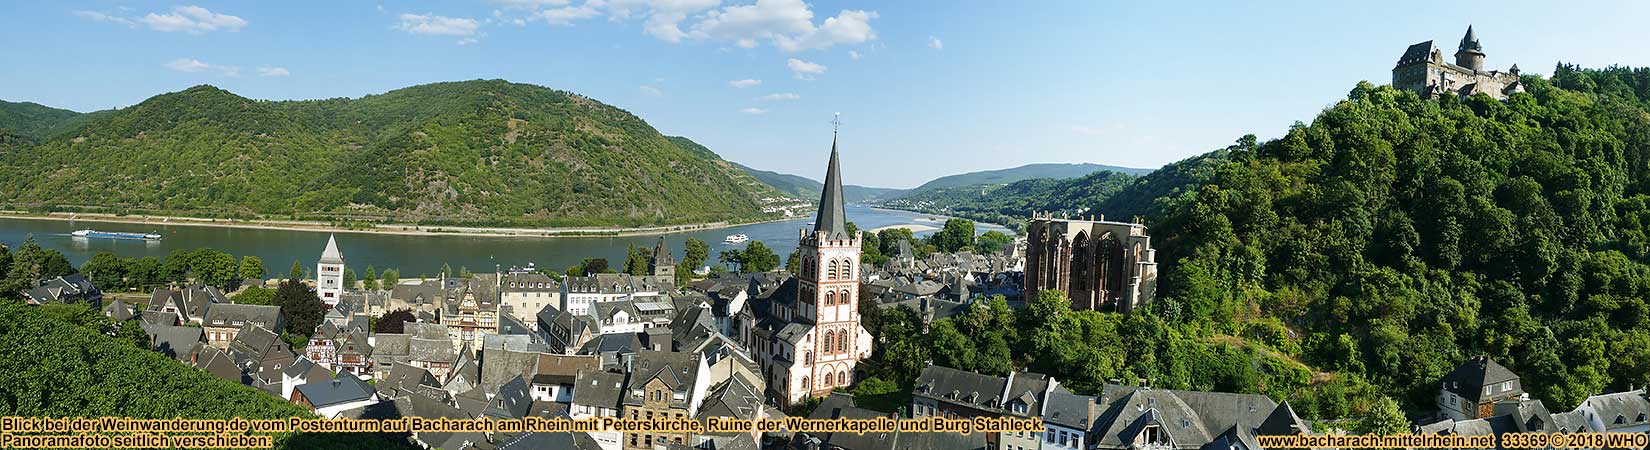 Panorama picture of Bacharach on the Rhine River